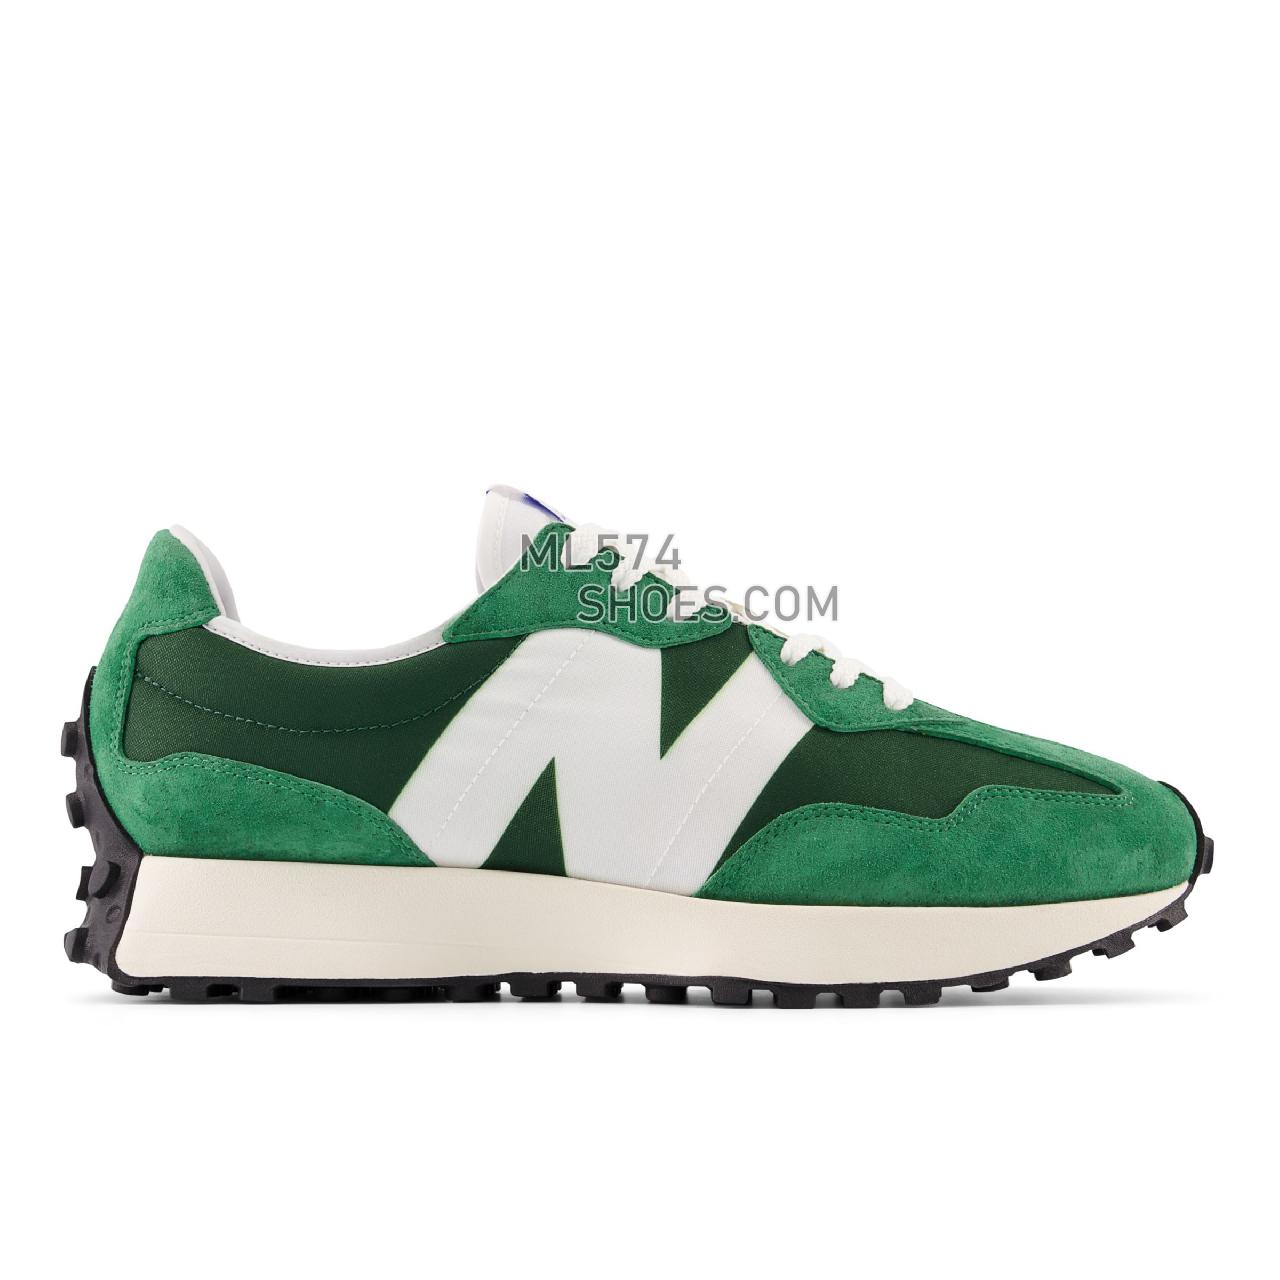 New Balance 327 - Men's Sport Style Sneakers - Varsity Green with Team Forest Green - MS327LG1